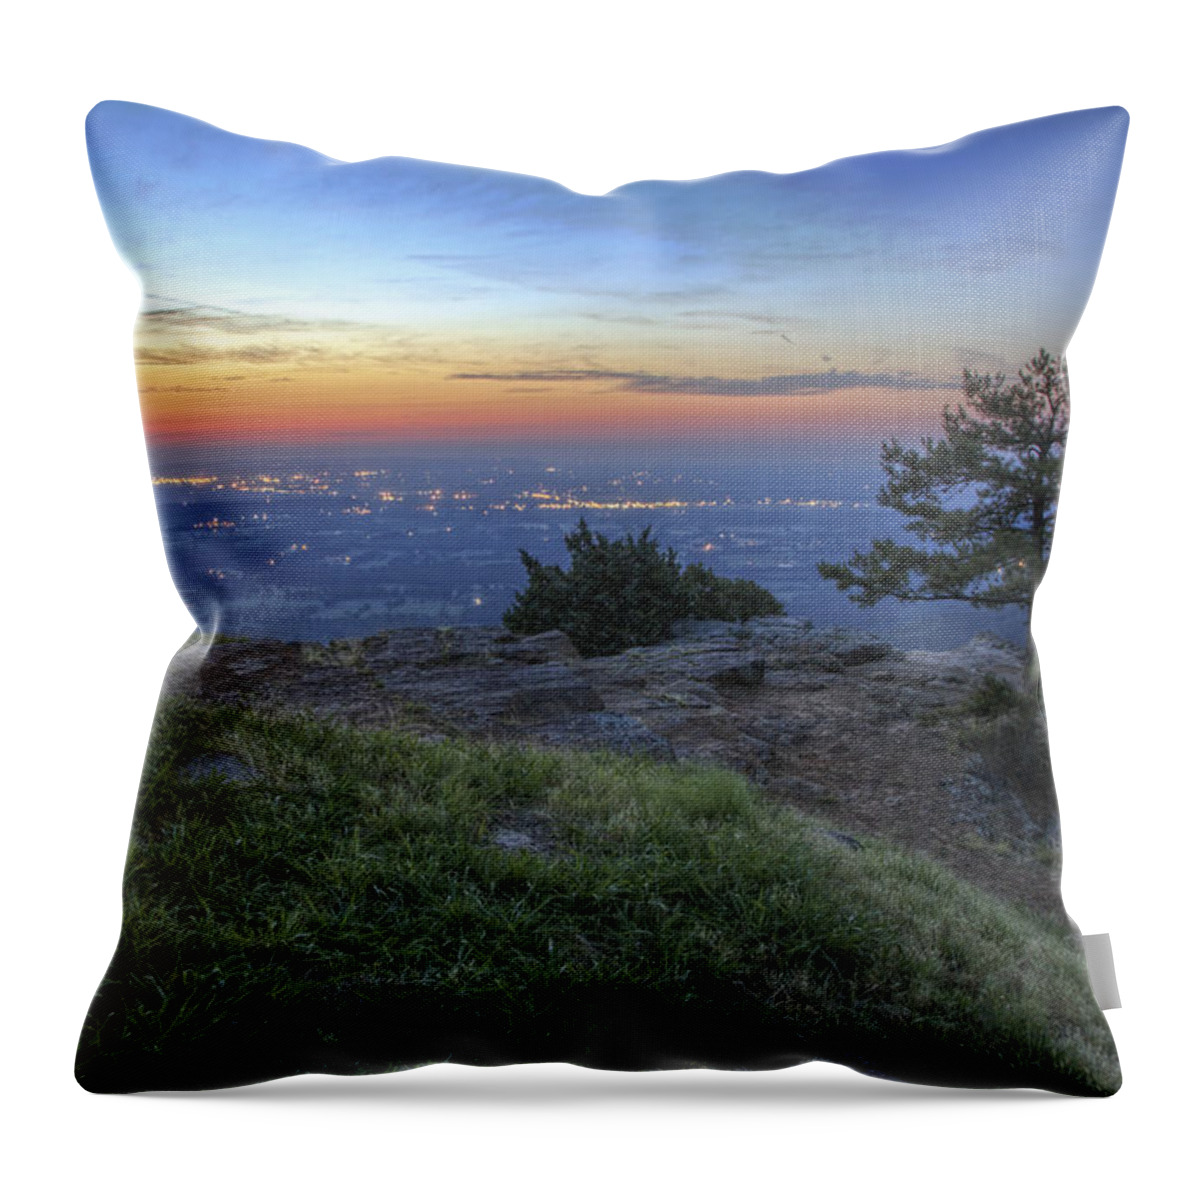 Mt. Nebo Throw Pillow featuring the photograph City Lights from Sunrise Point at Mt. Nebo - Arkansas by Jason Politte